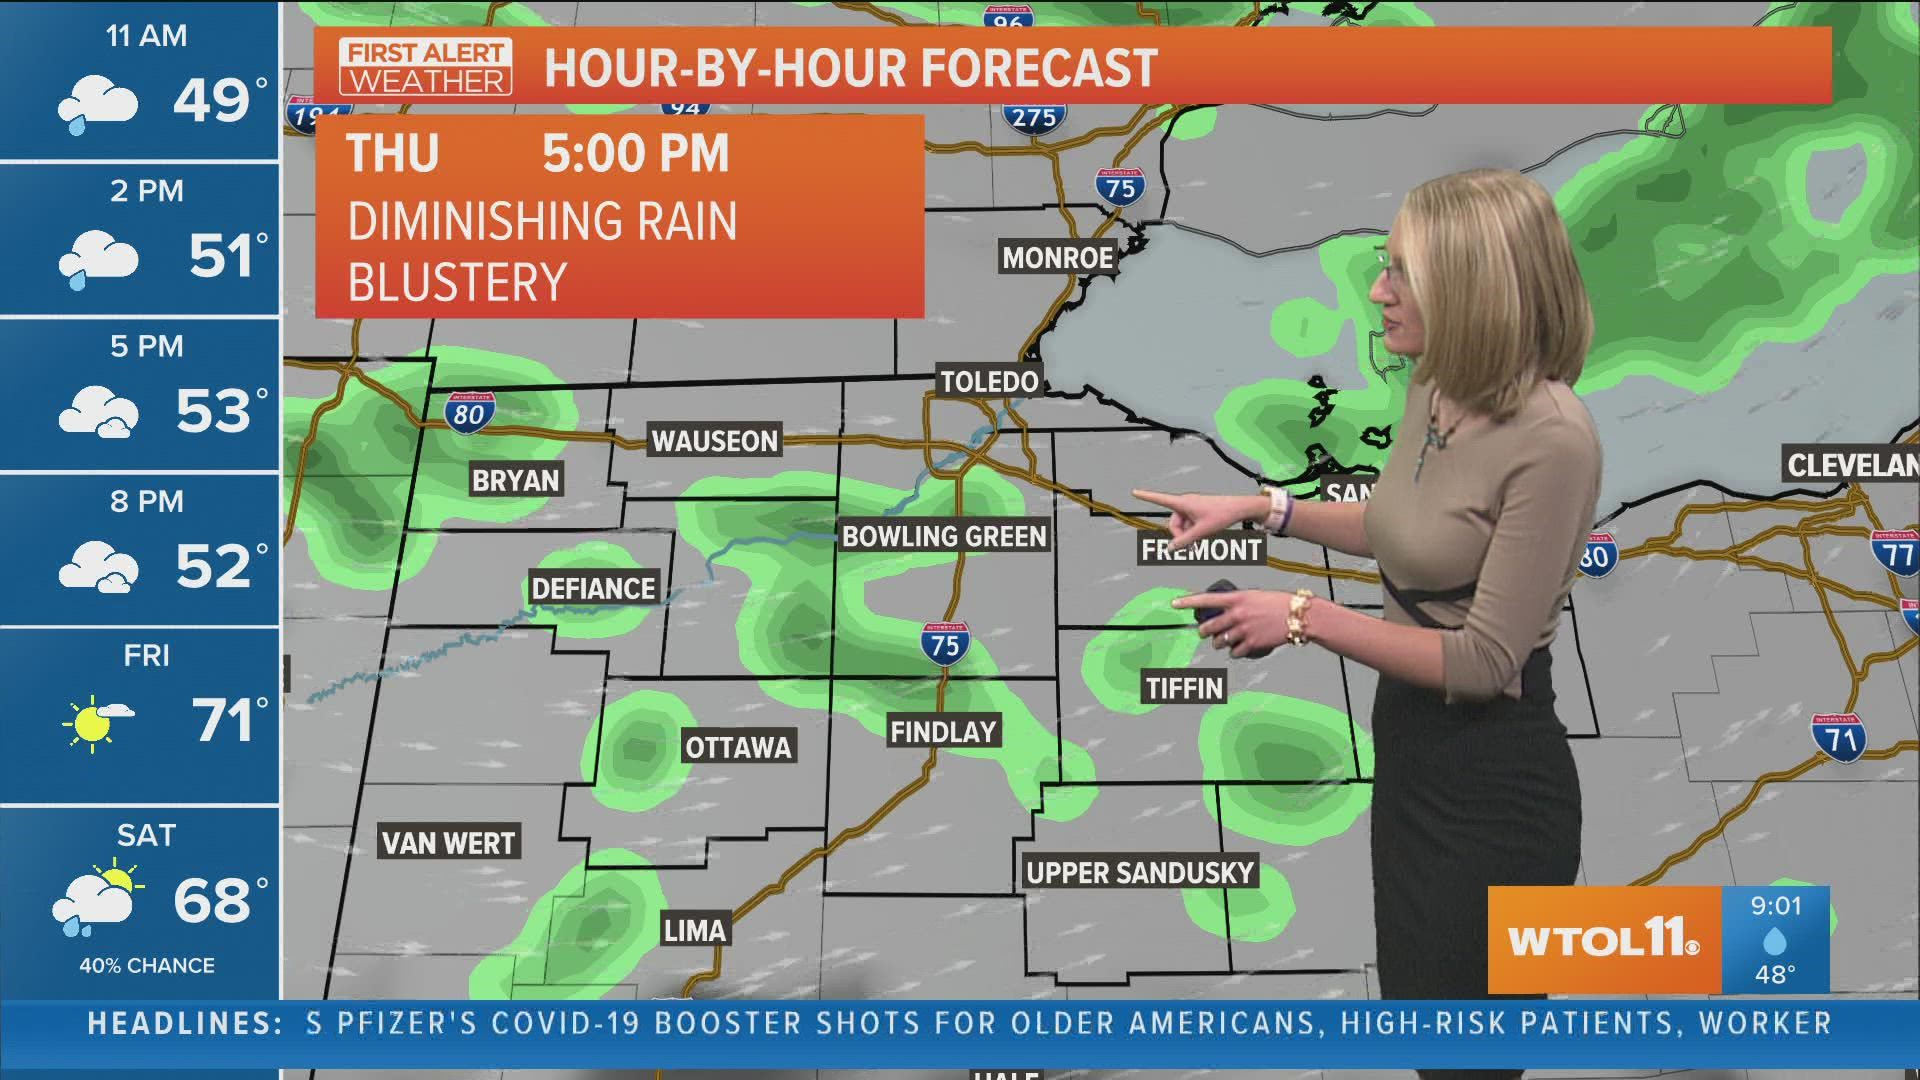 Rain is still in the forecast for today, but the bulk of it has passed. It will be another cool, fall-feeling day.